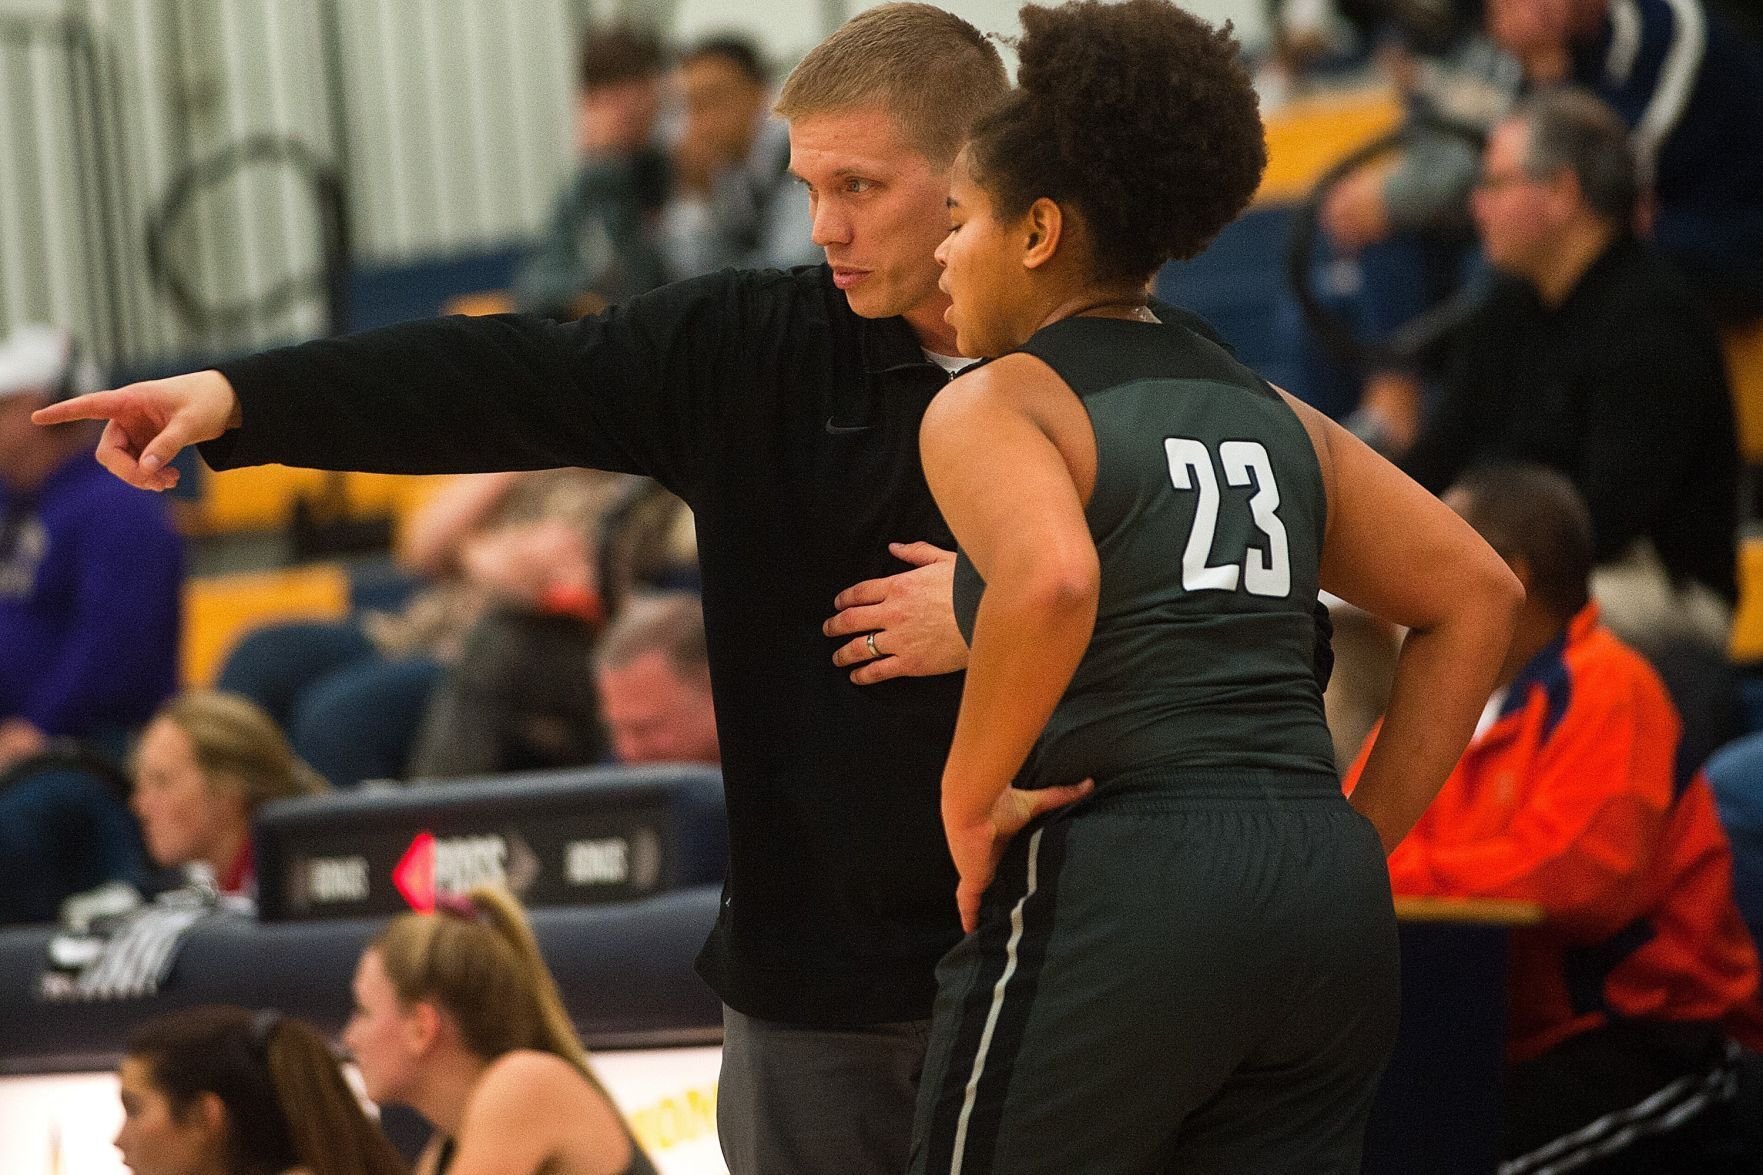 Corey Ostling Reclaims Normal West Girls Basketball Head Coach Role after Past Success